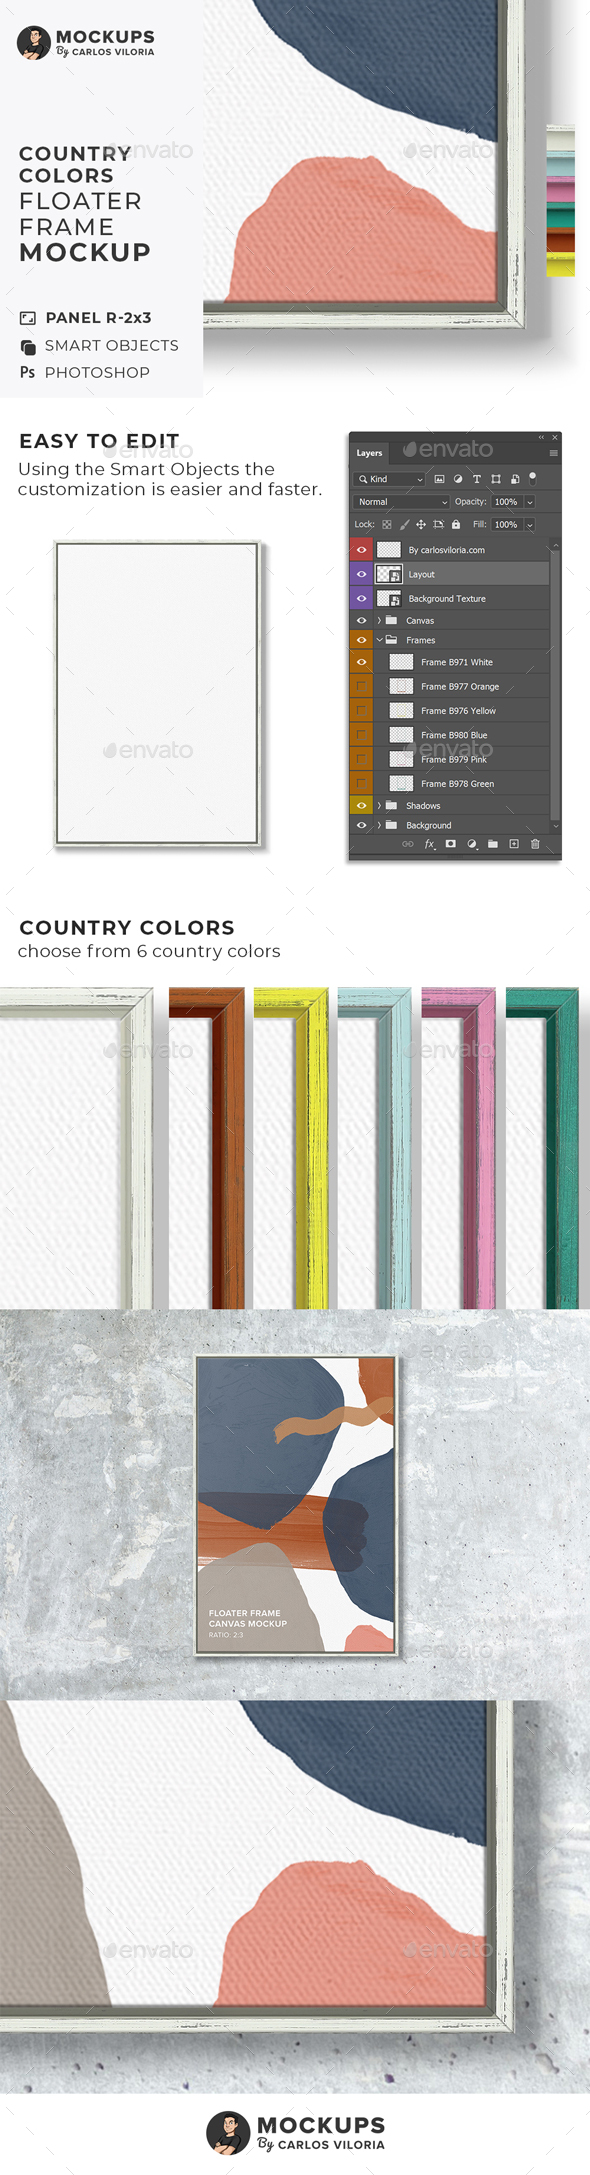 [DOWNLOAD]Floater Frame Canvas Ratio 2x3 Mockup - Country Colors